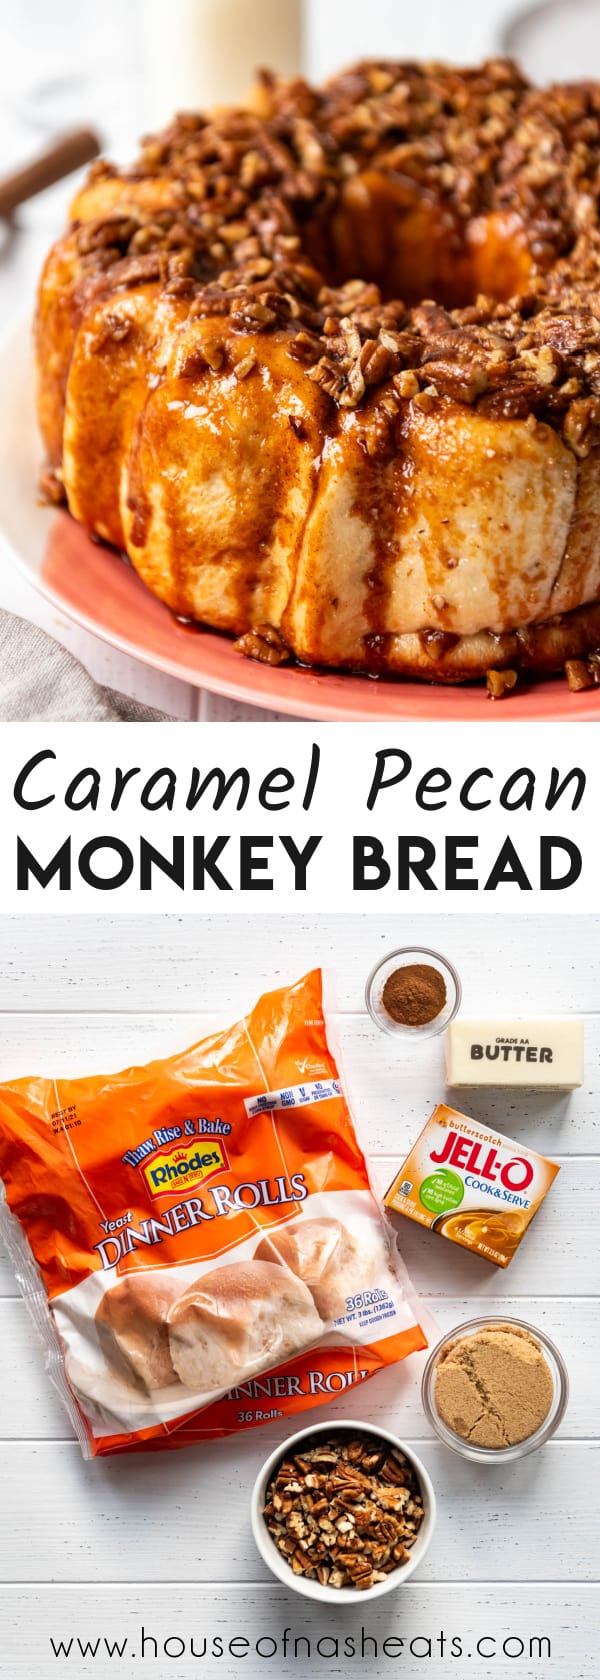 A collage of images of monkey bread and ingredients with text overlay.